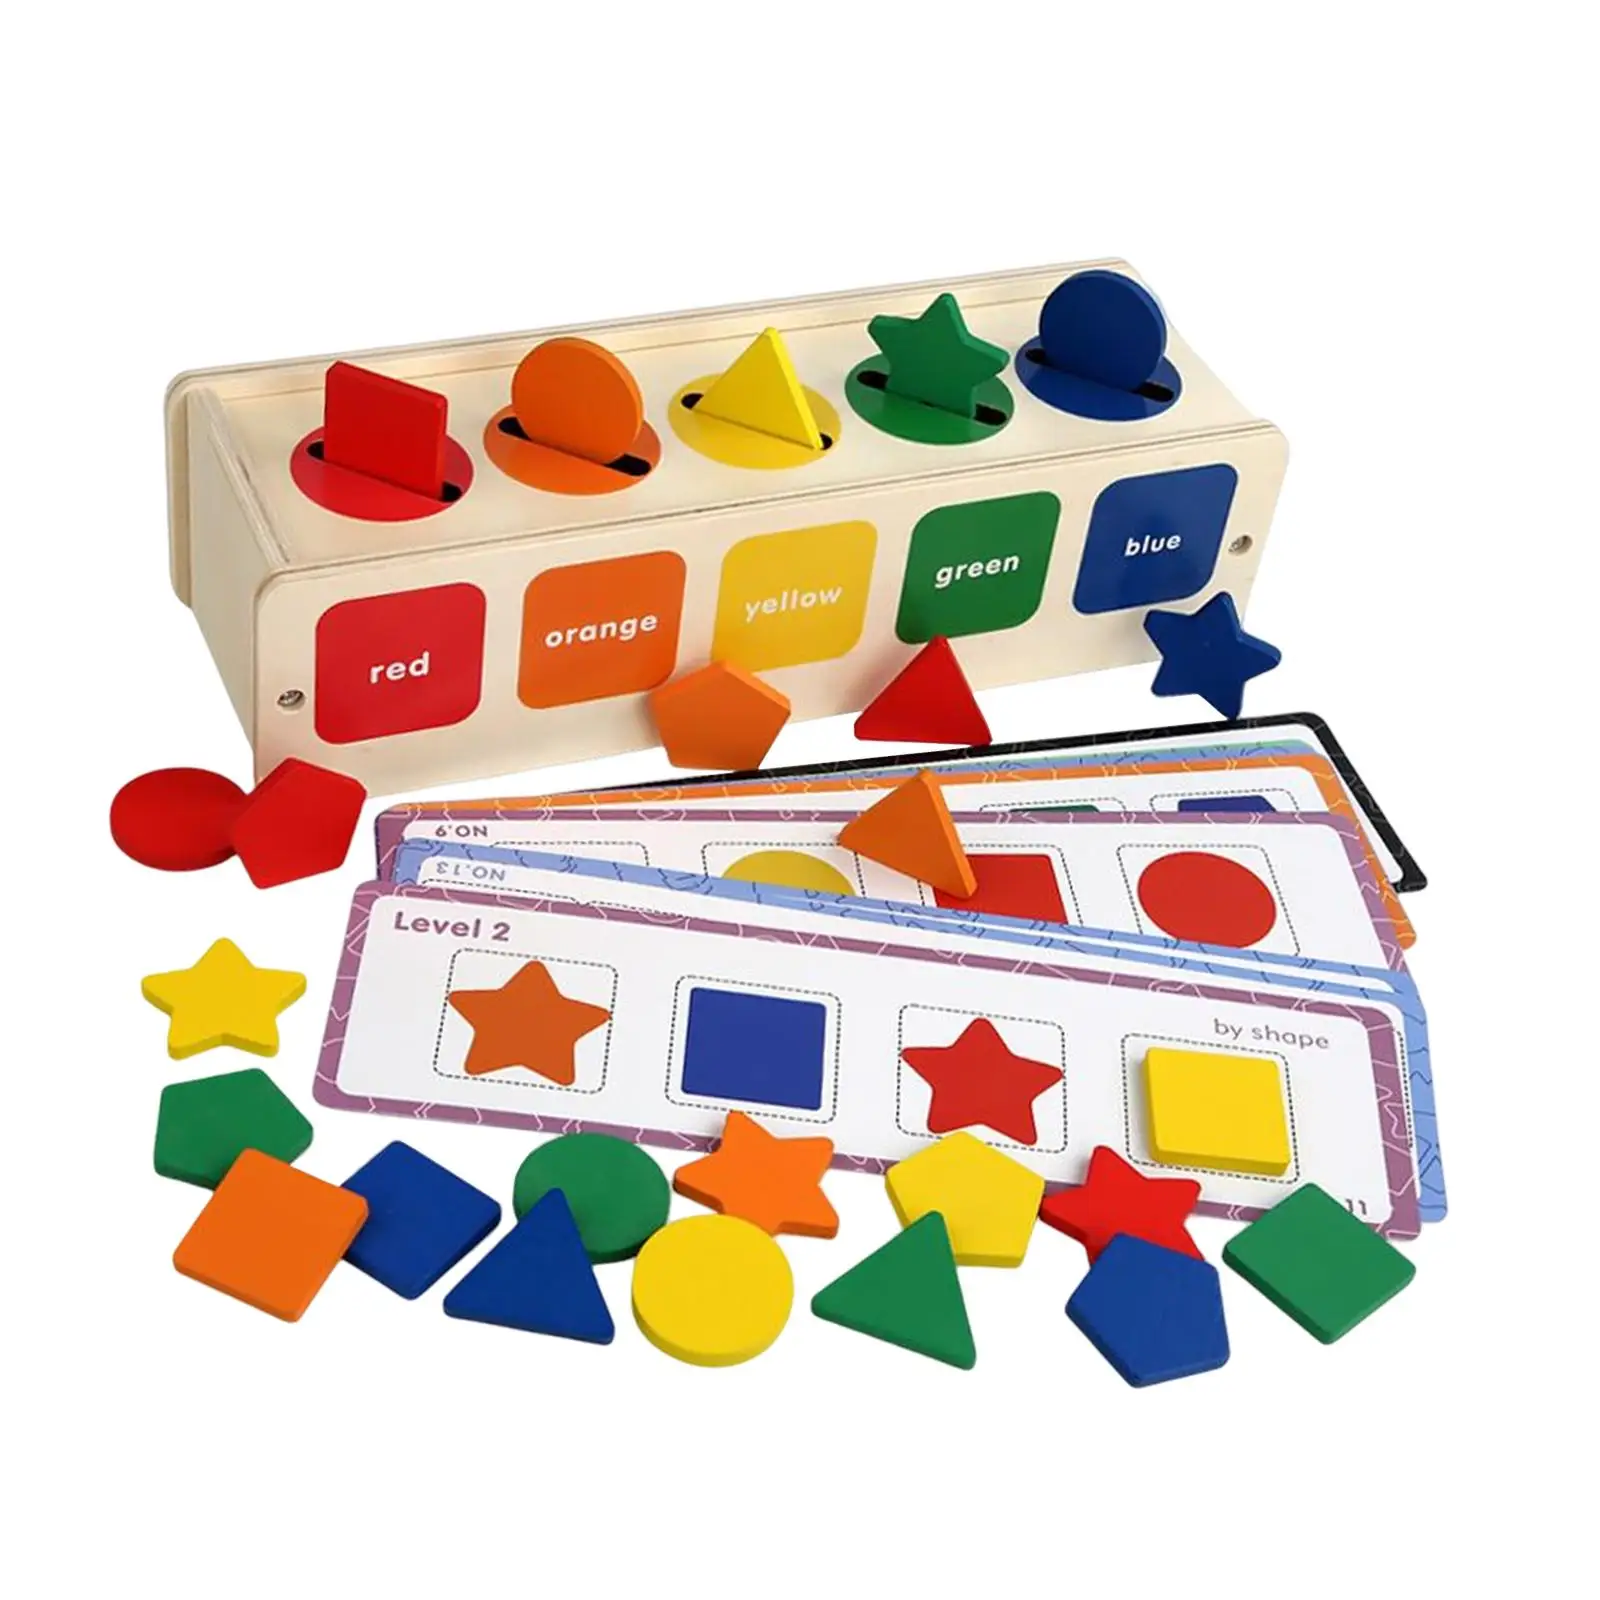 Montessori Wooden Shape and Color Sorting Toy with Storage Box for Birthday Gifts